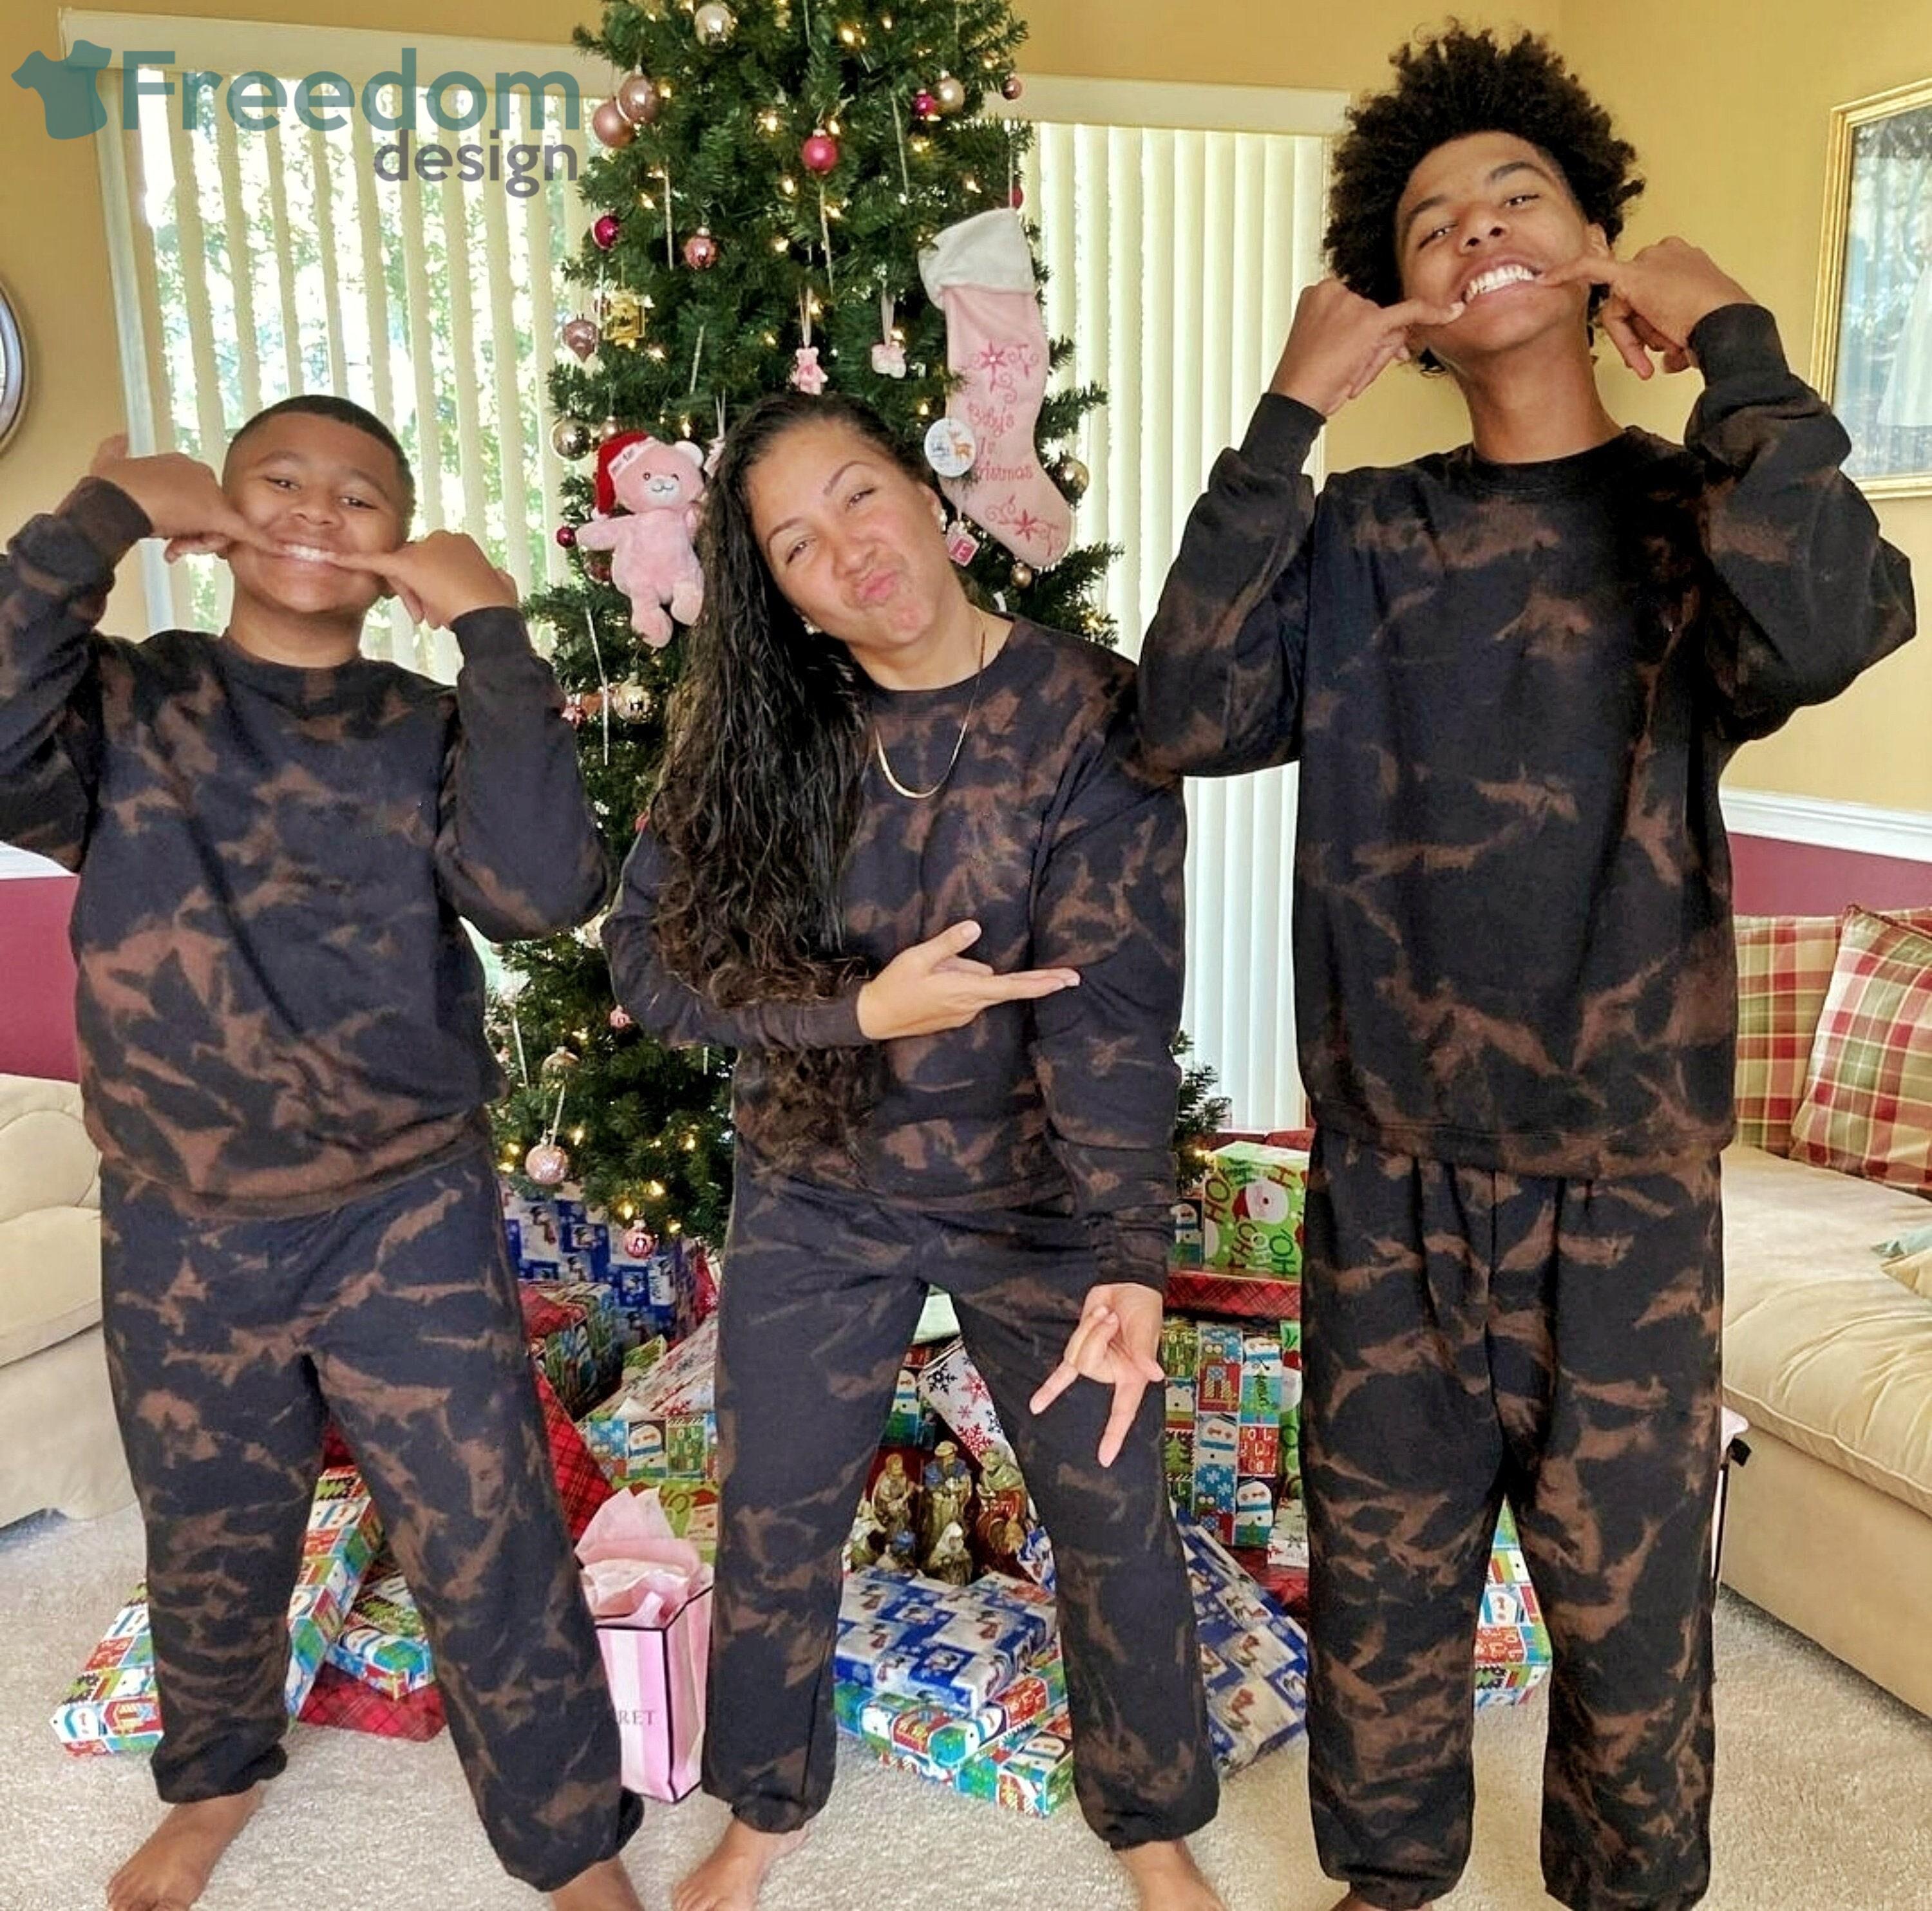 https://image.freedomdesignstore.com/2022/08/tie-dye-sweat-suit-family-matching-family-outfits-family-pajamas.jpg